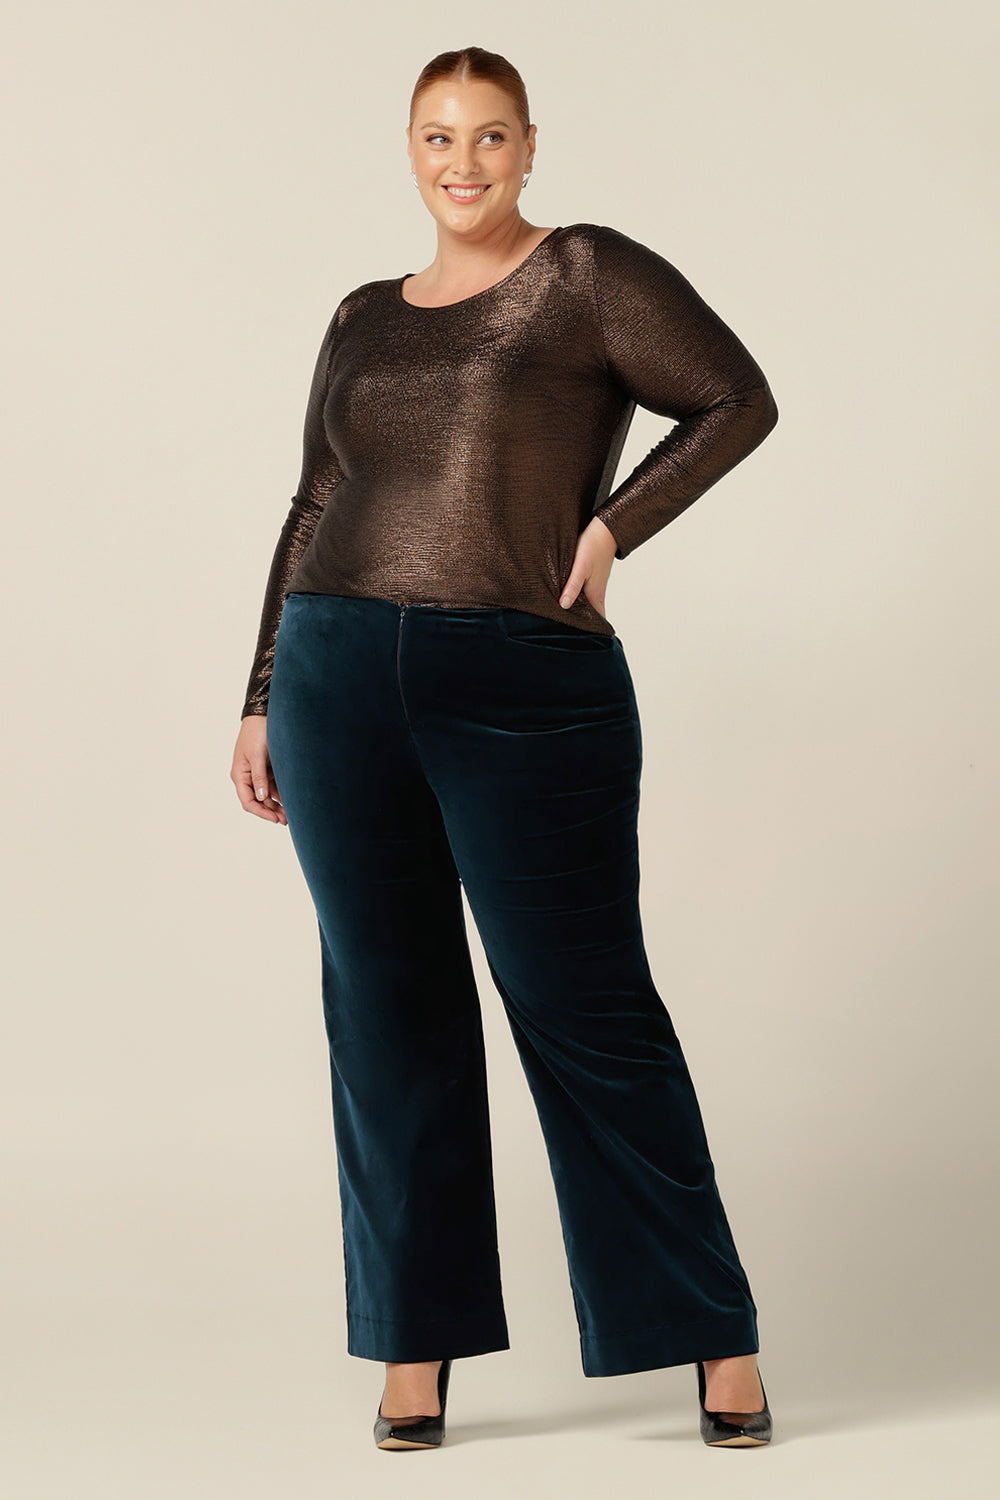 Navy Lace Top and Trousers Plus Size Clothing